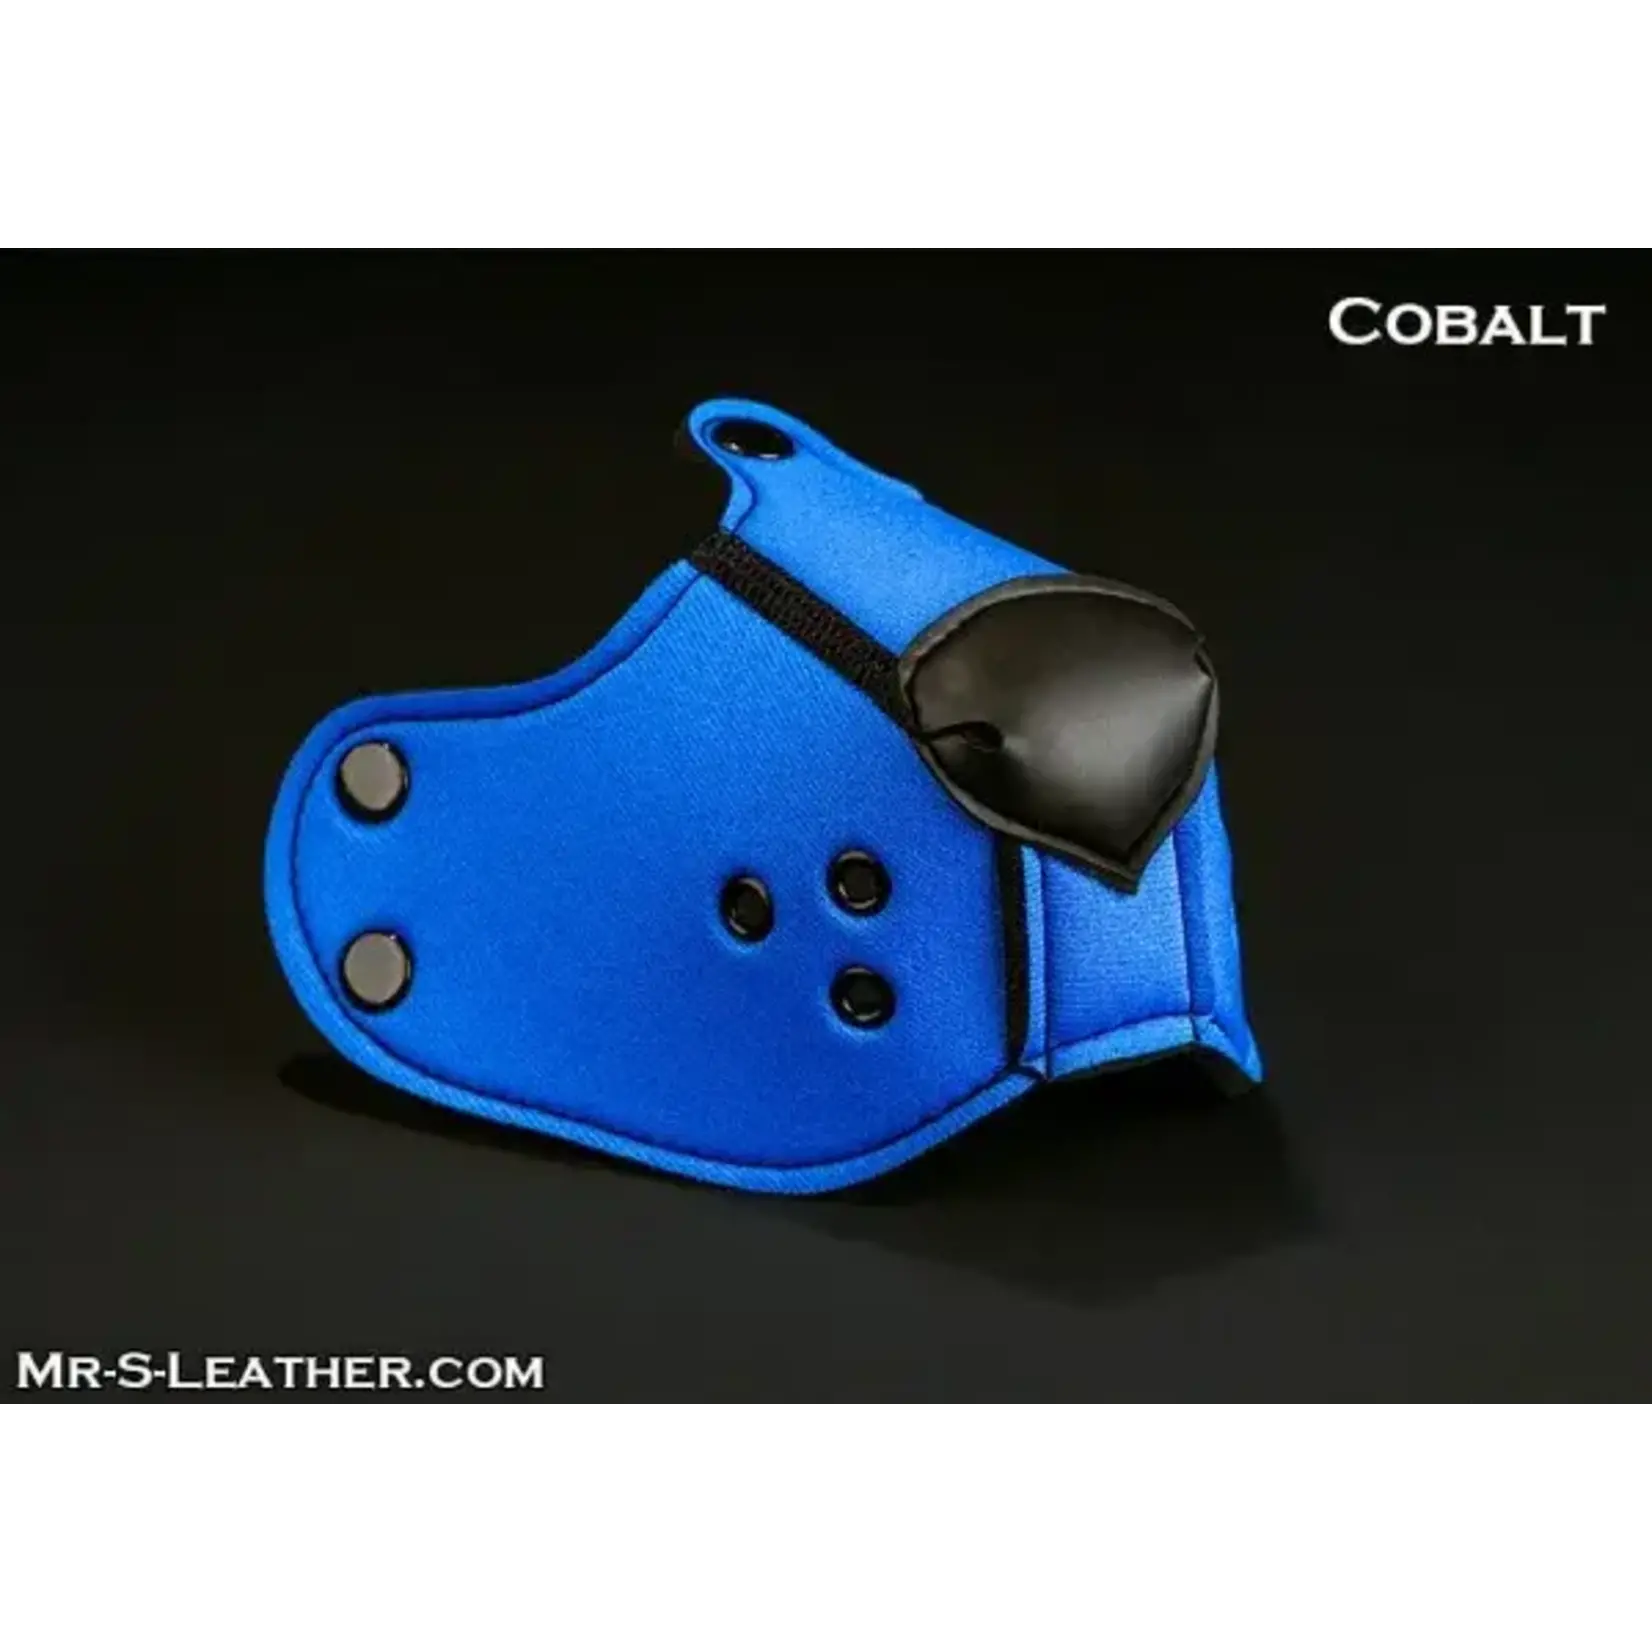 Mr. S Leather Mr. S Leather - Neo K9 Muzzle - ONE SIZE